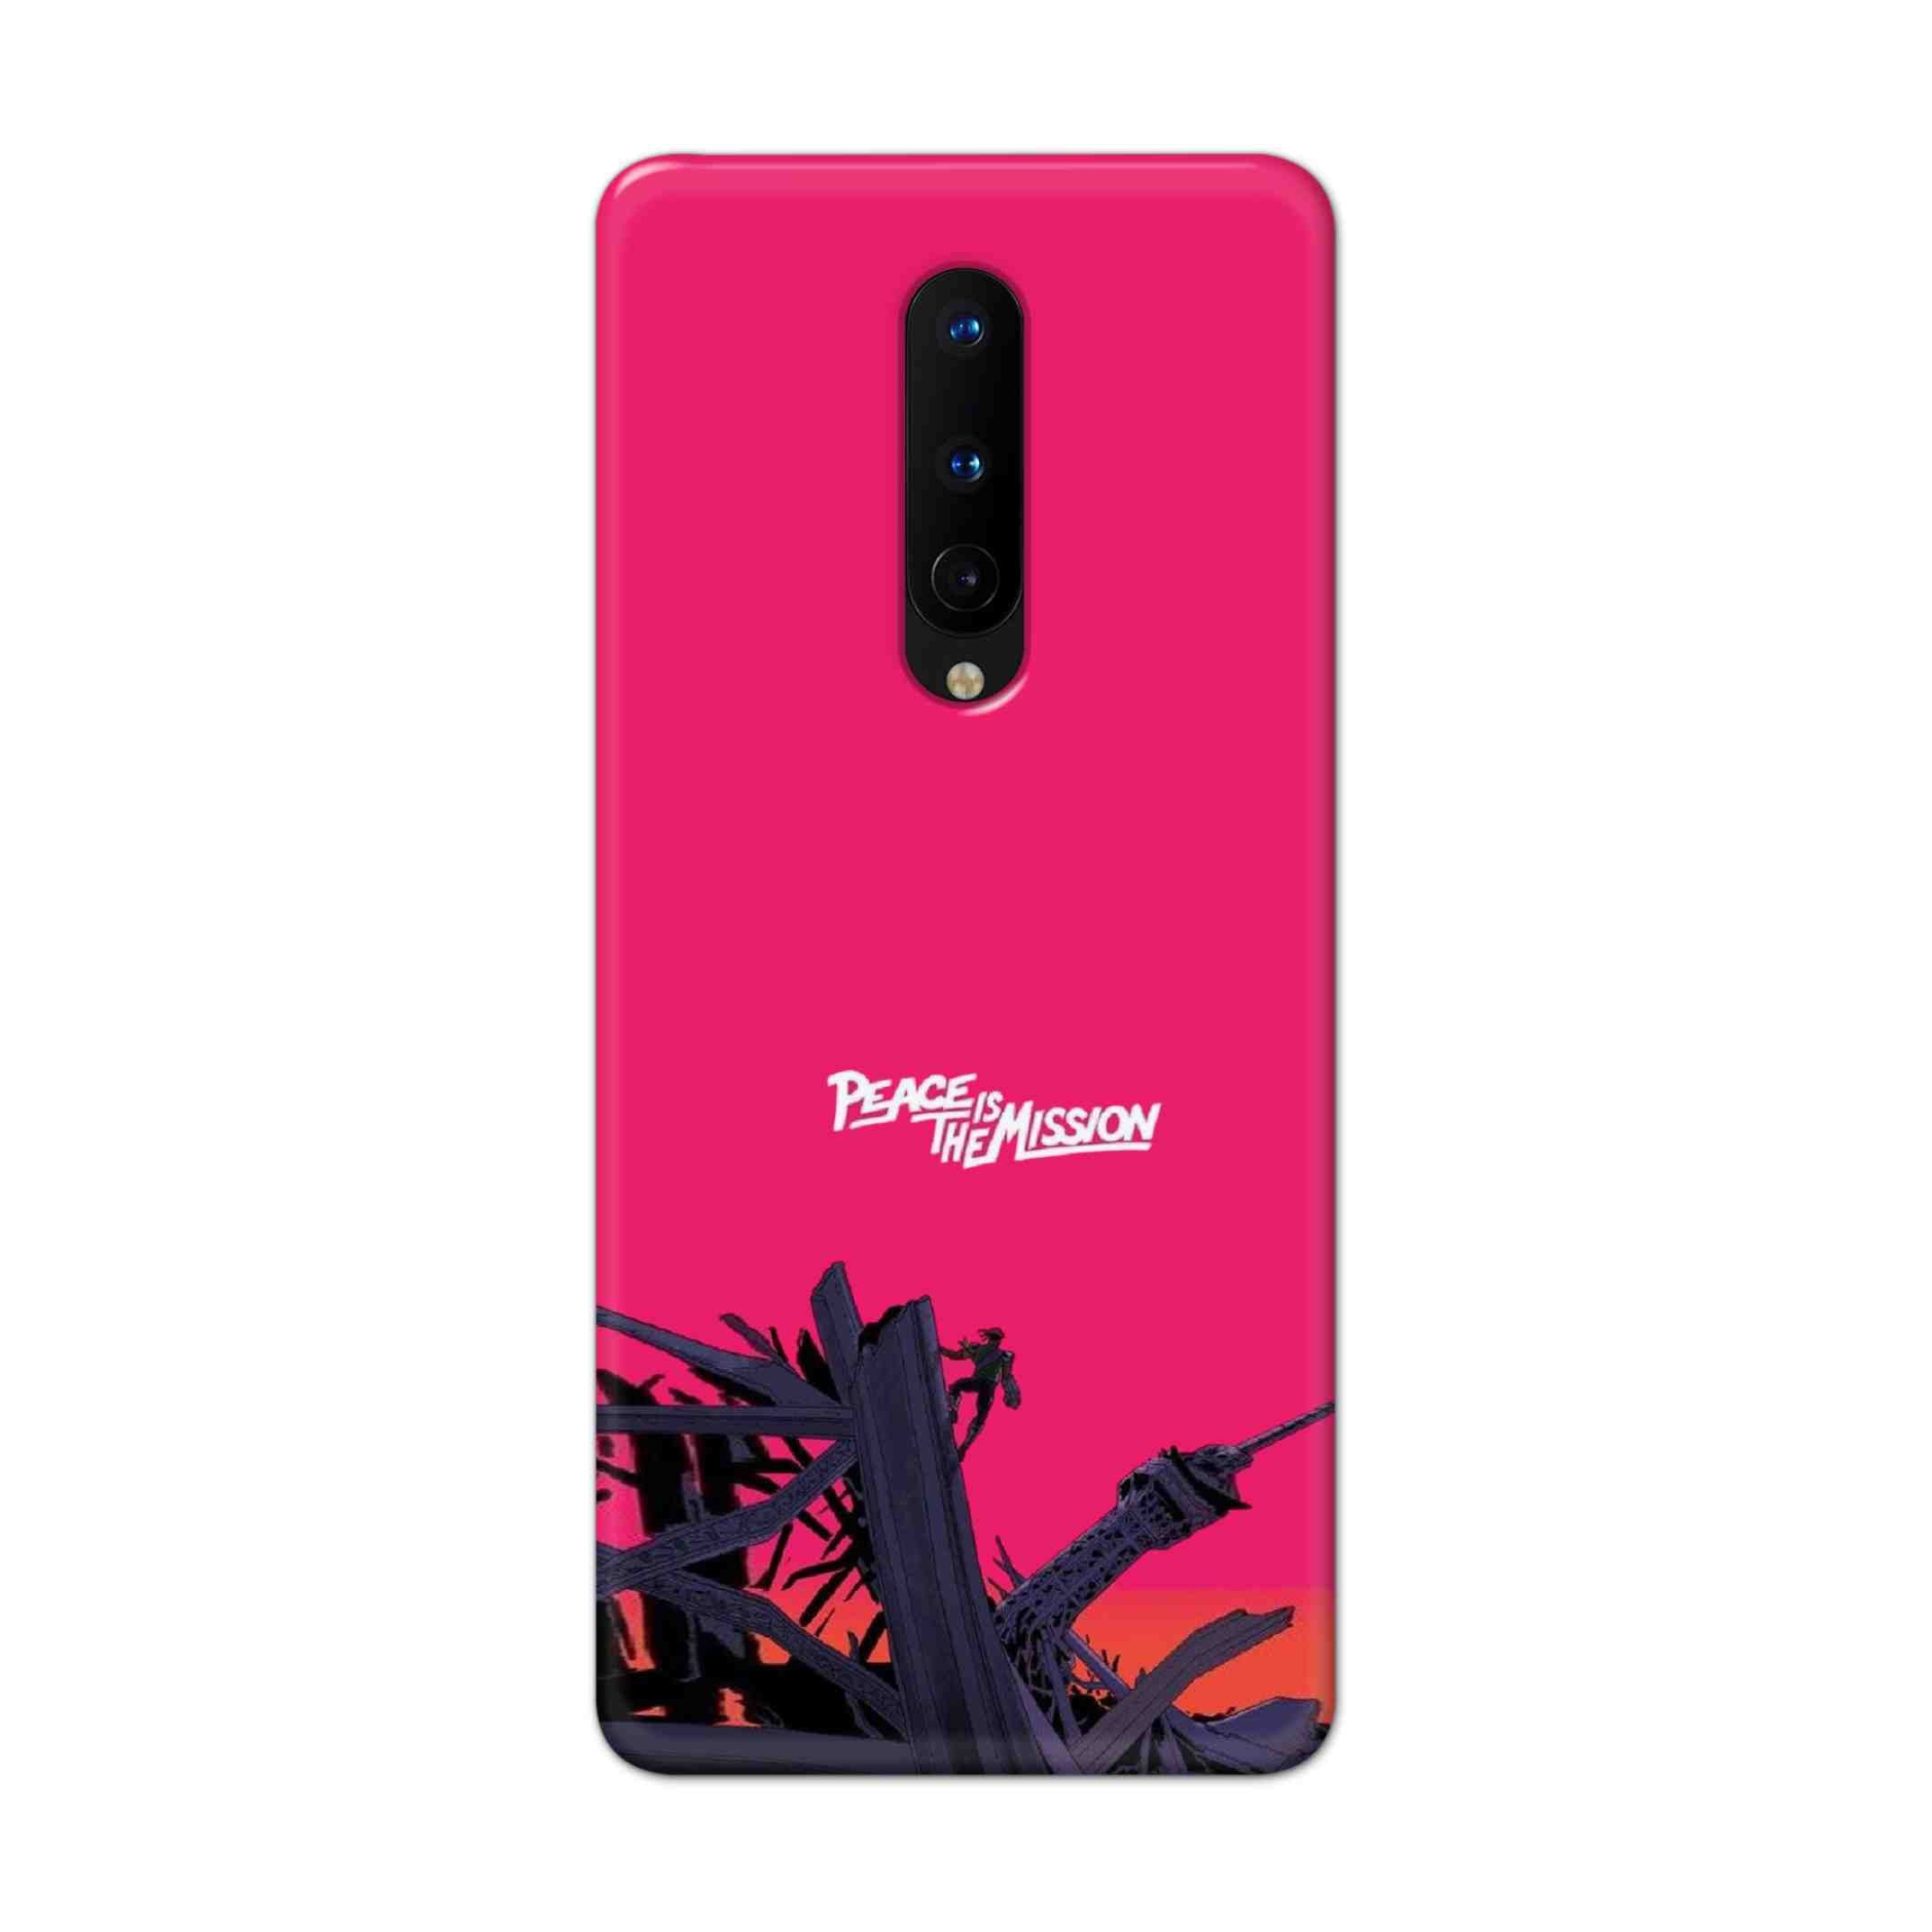 Buy Peace Is The Mission Hard Back Mobile Phone Case Cover For OnePlus 8 Online